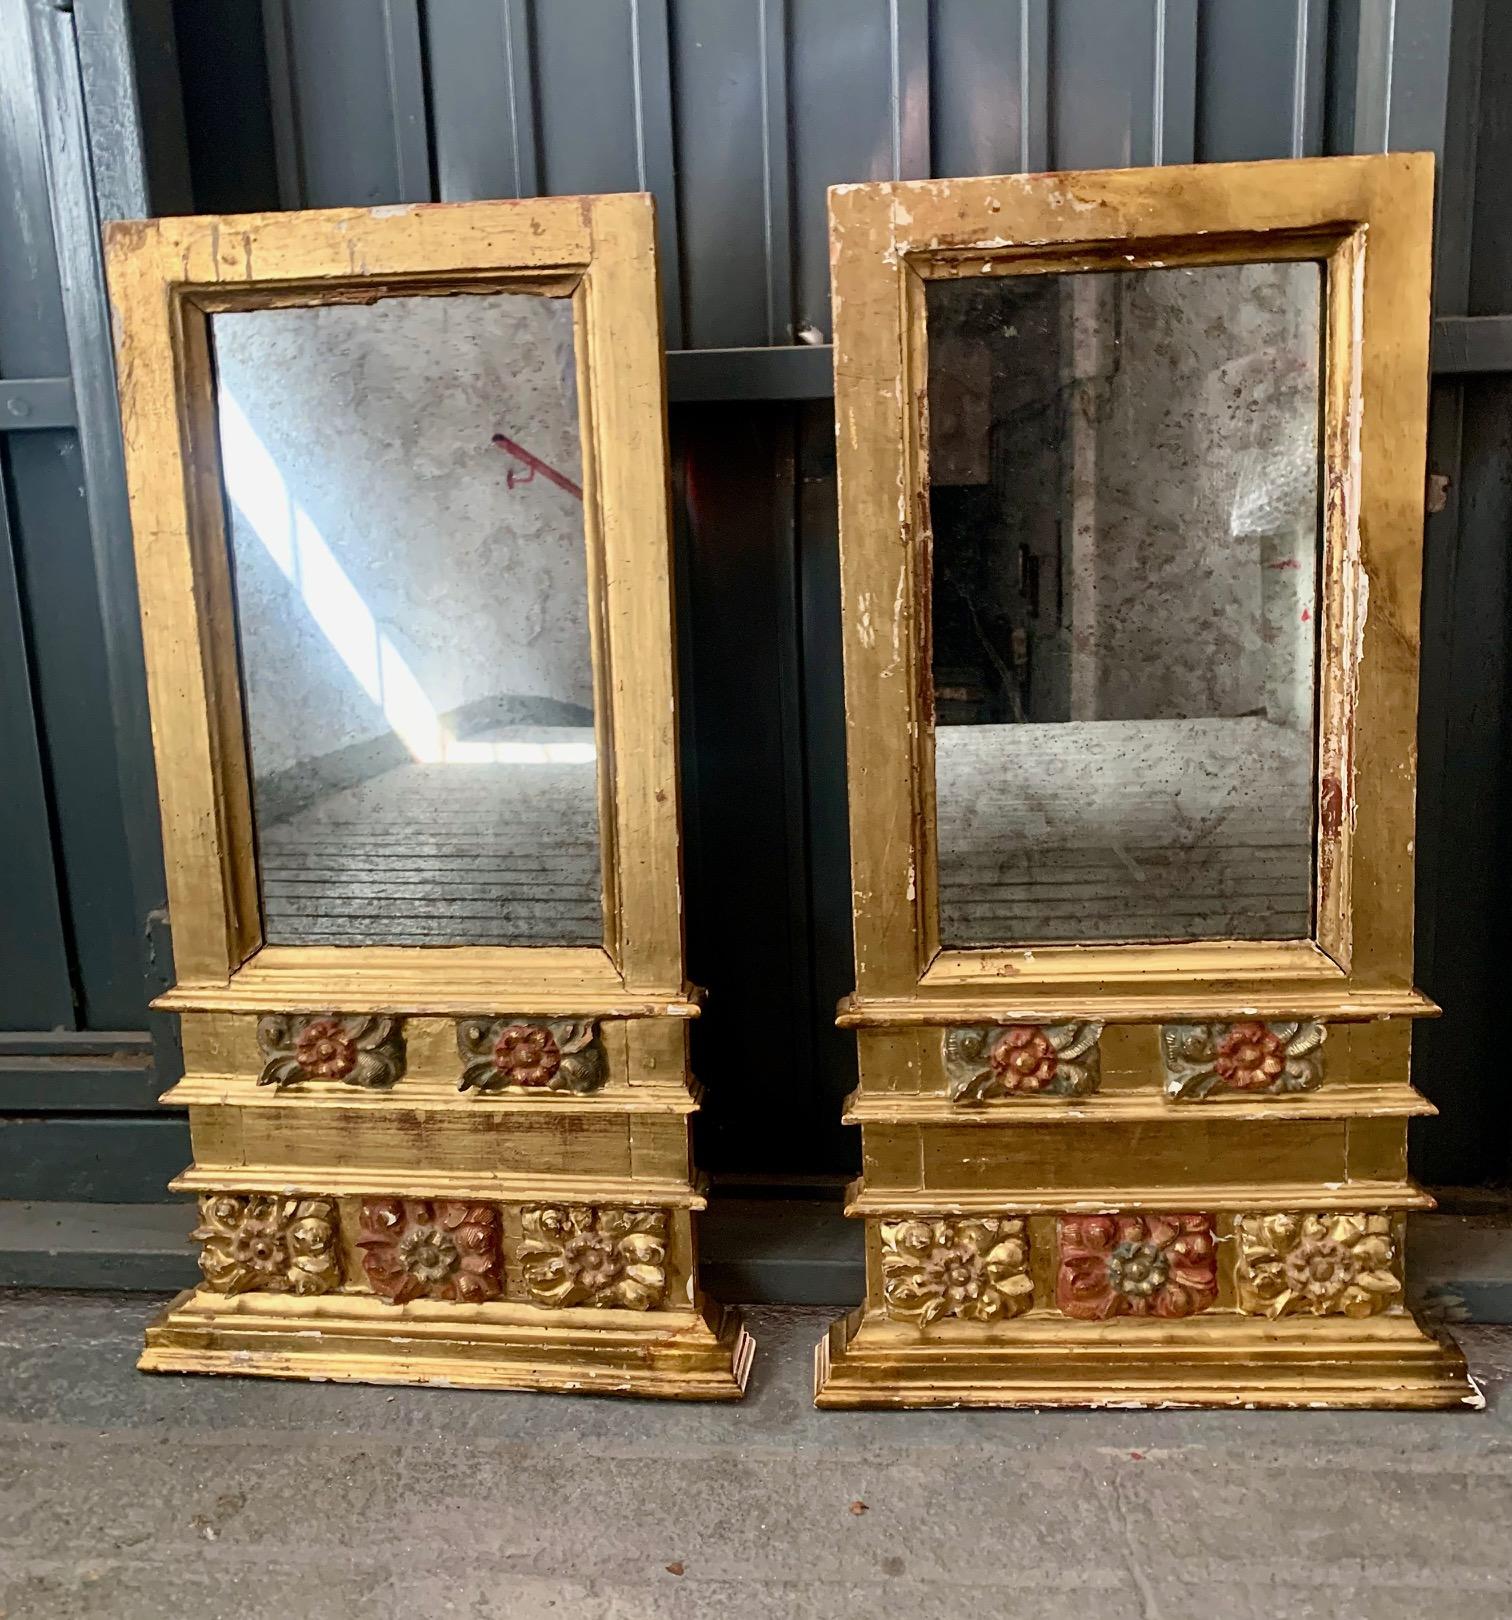 A pair of Spanish Baroque mirrors, from the 18th century, in gilded and polychrome wood, in the lower part hand carved wood with plant motifs, in gold, green and red. One of the mirrors has some marks corresponding to their age.